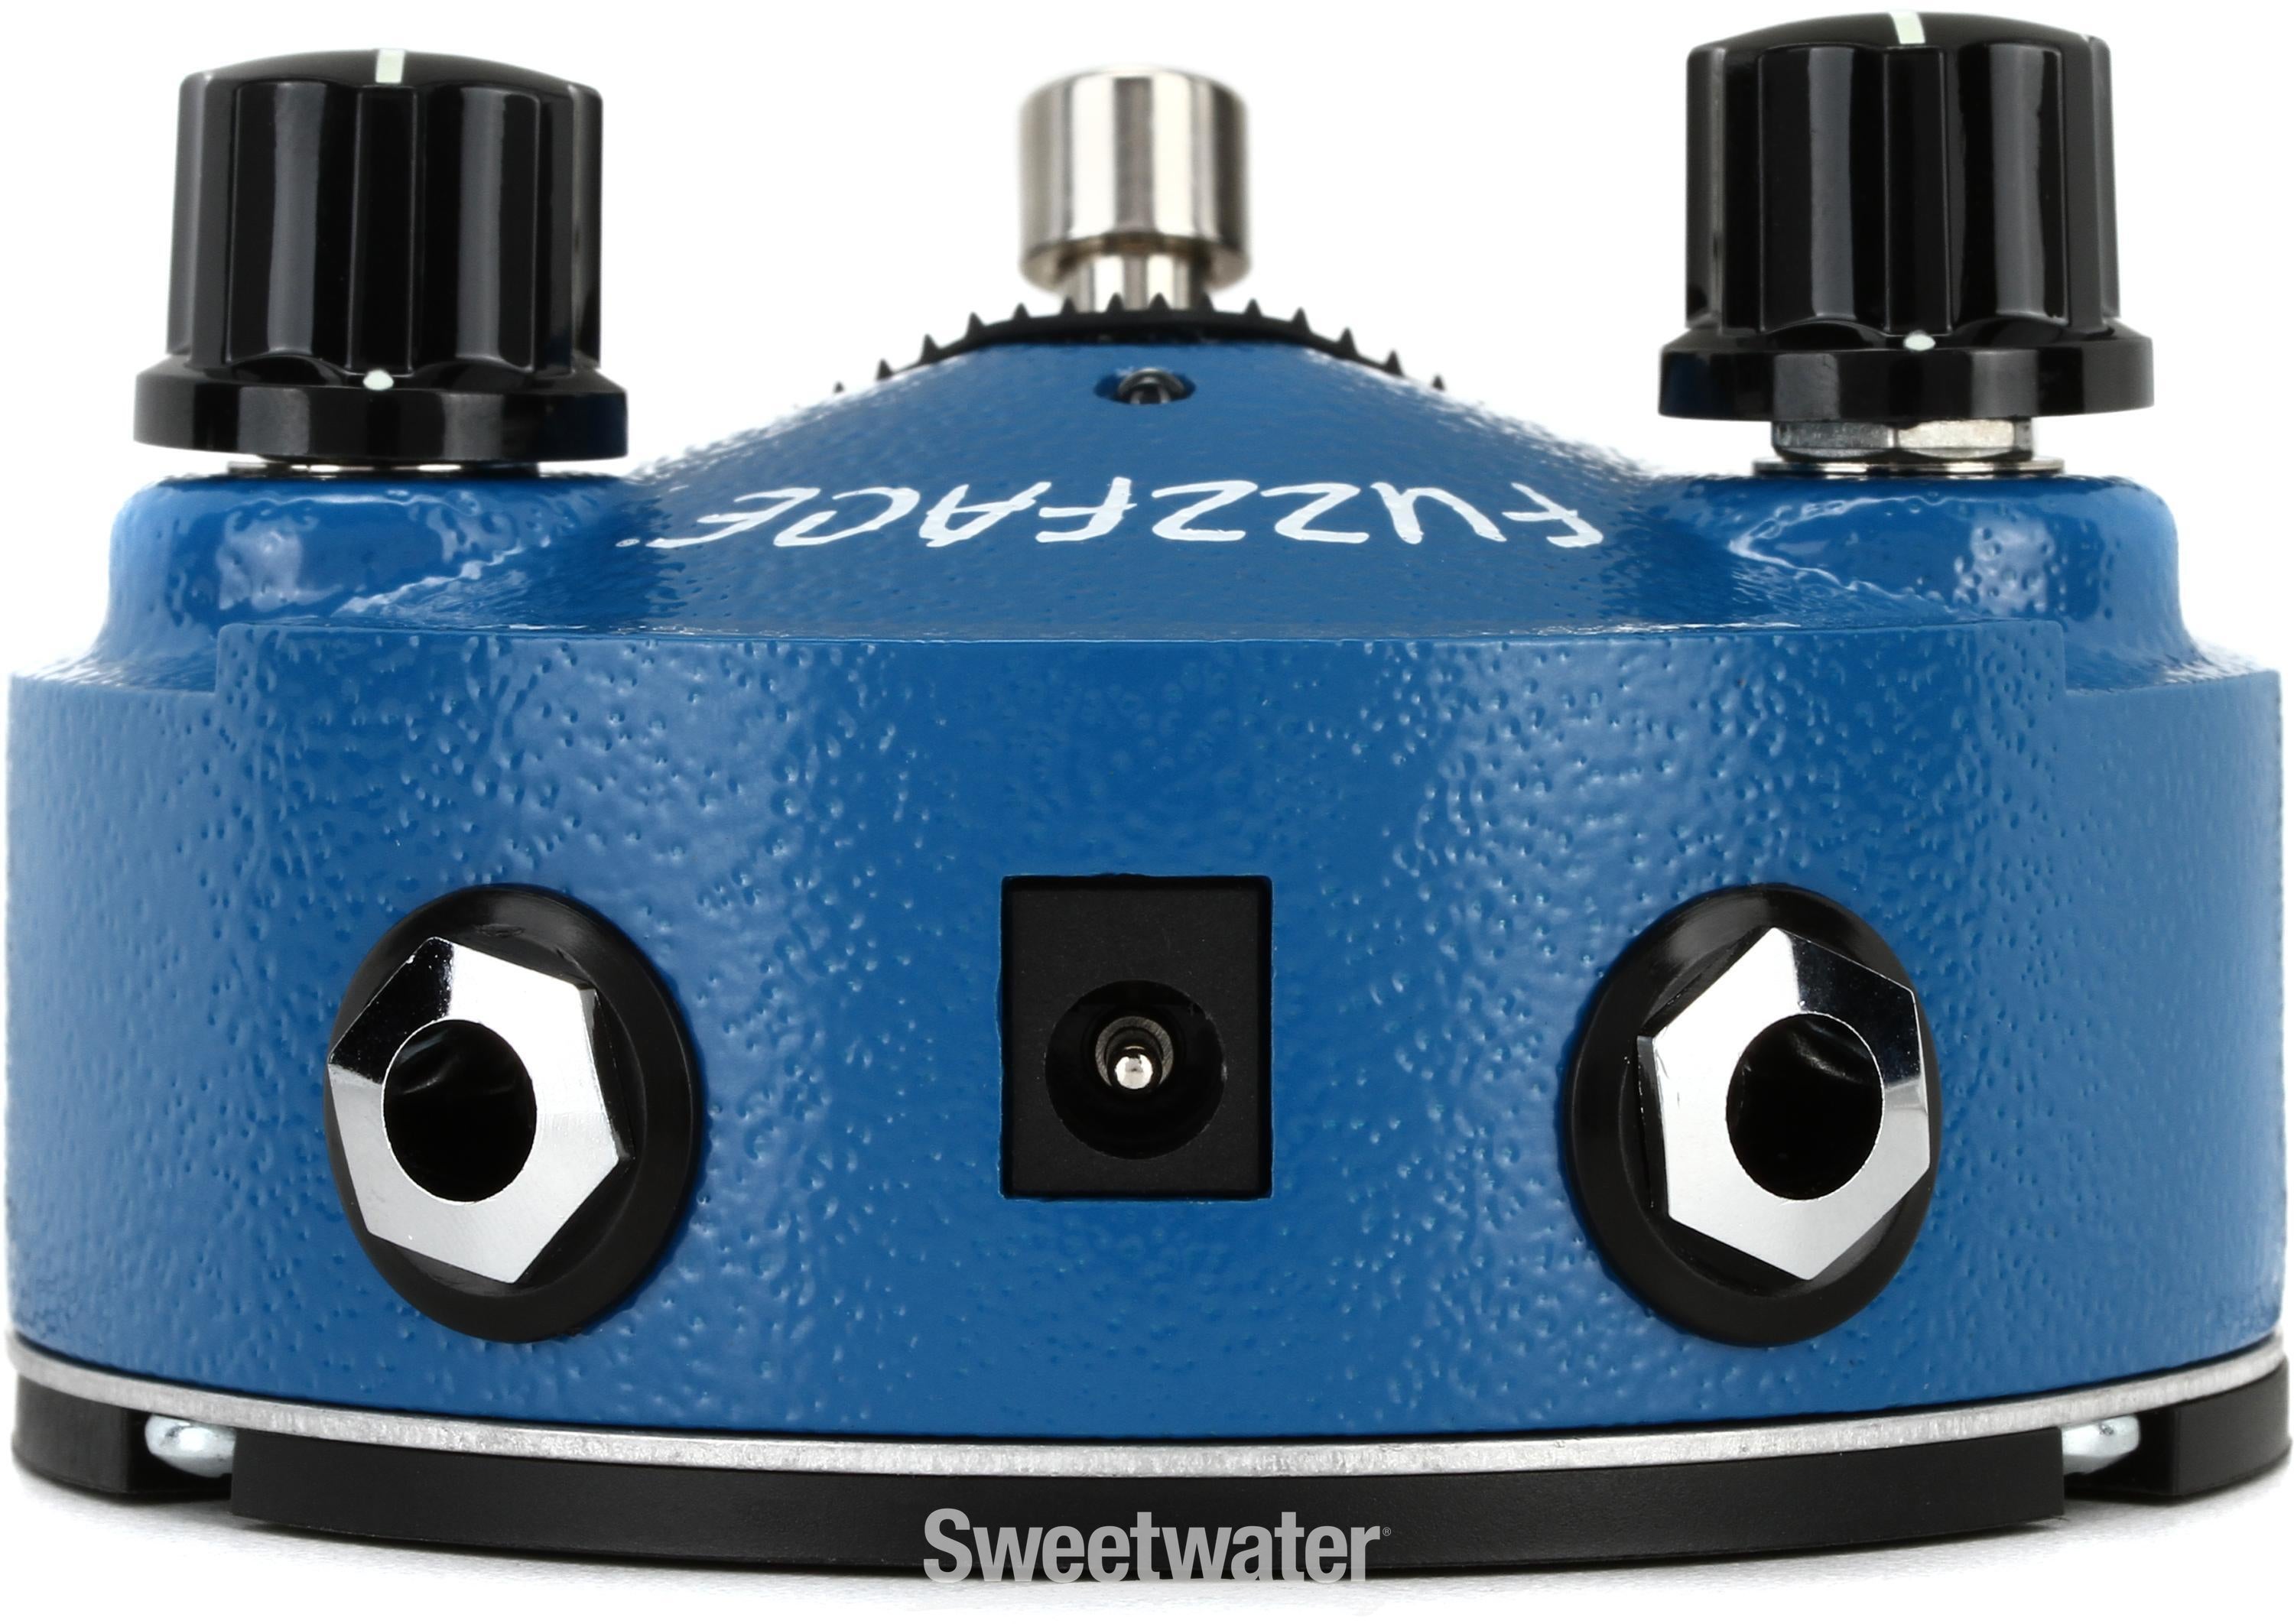 Dunlop FFM1 Silicon Fuzz Face Mini Distortion Pedal | Sweetwater